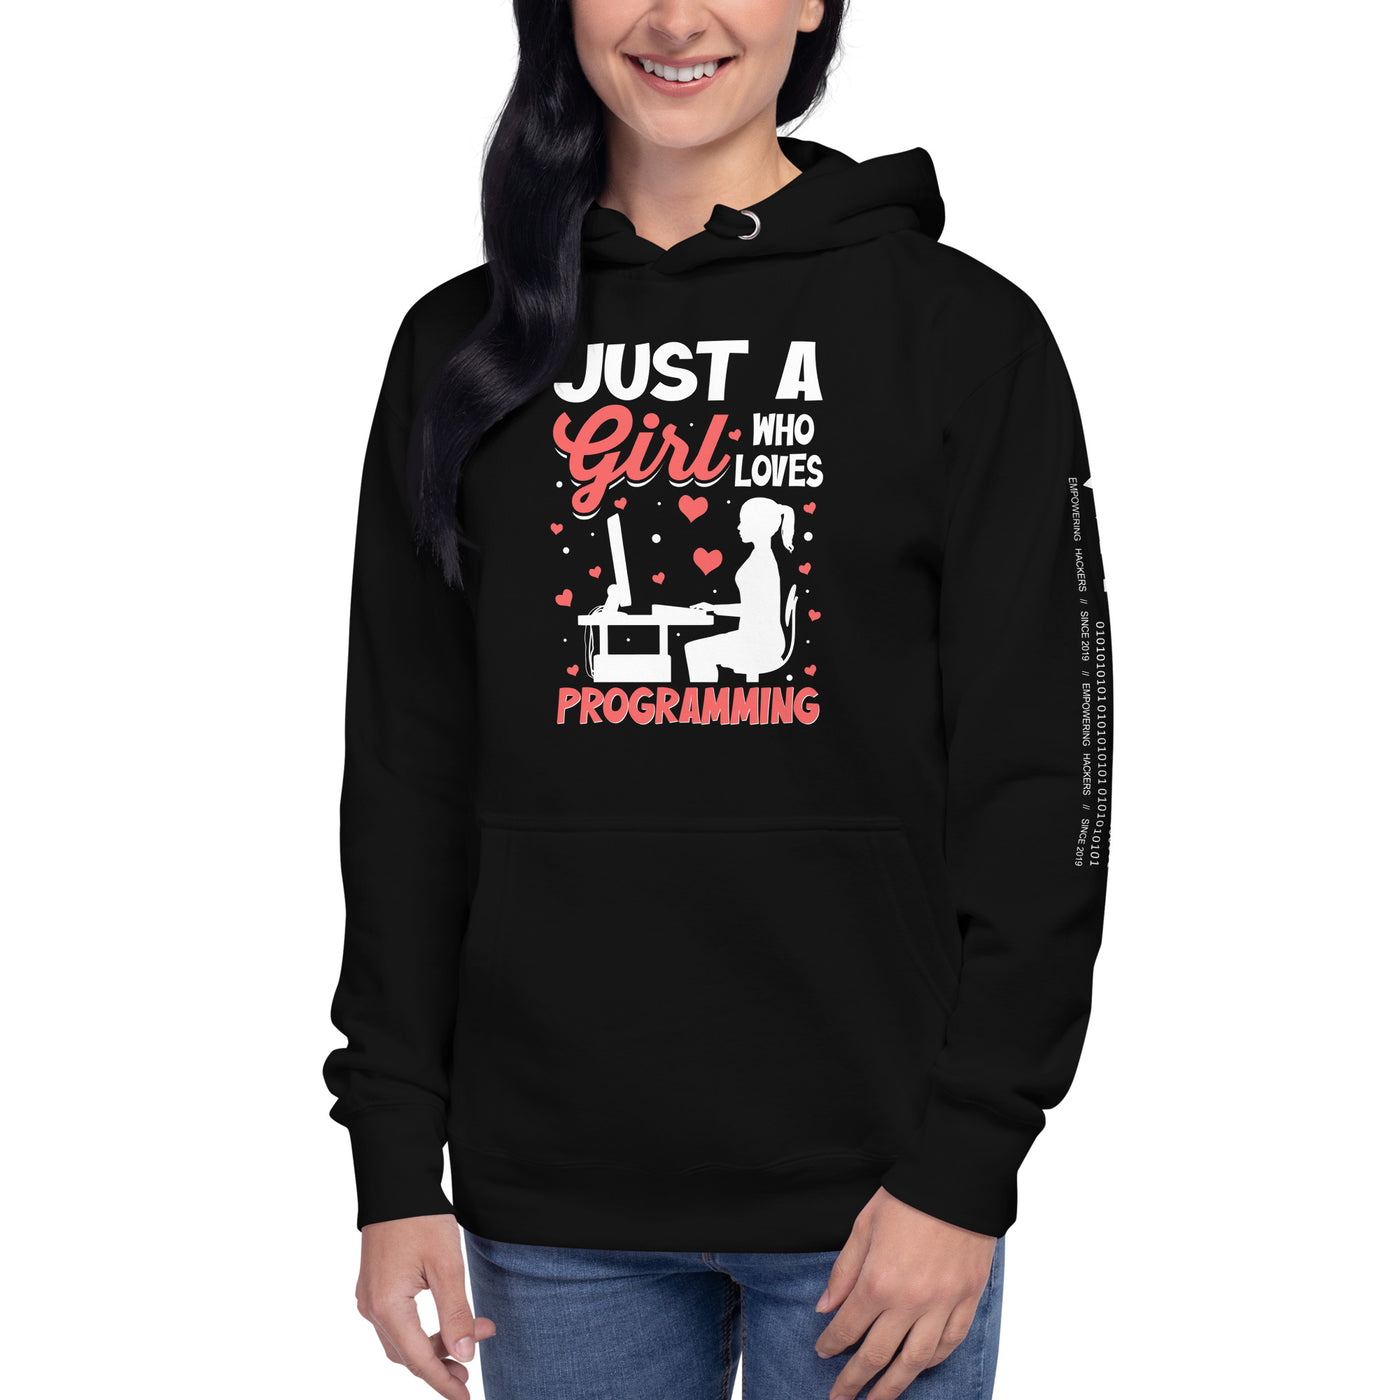 Just a girl who loves programming - Unisex Hoodie